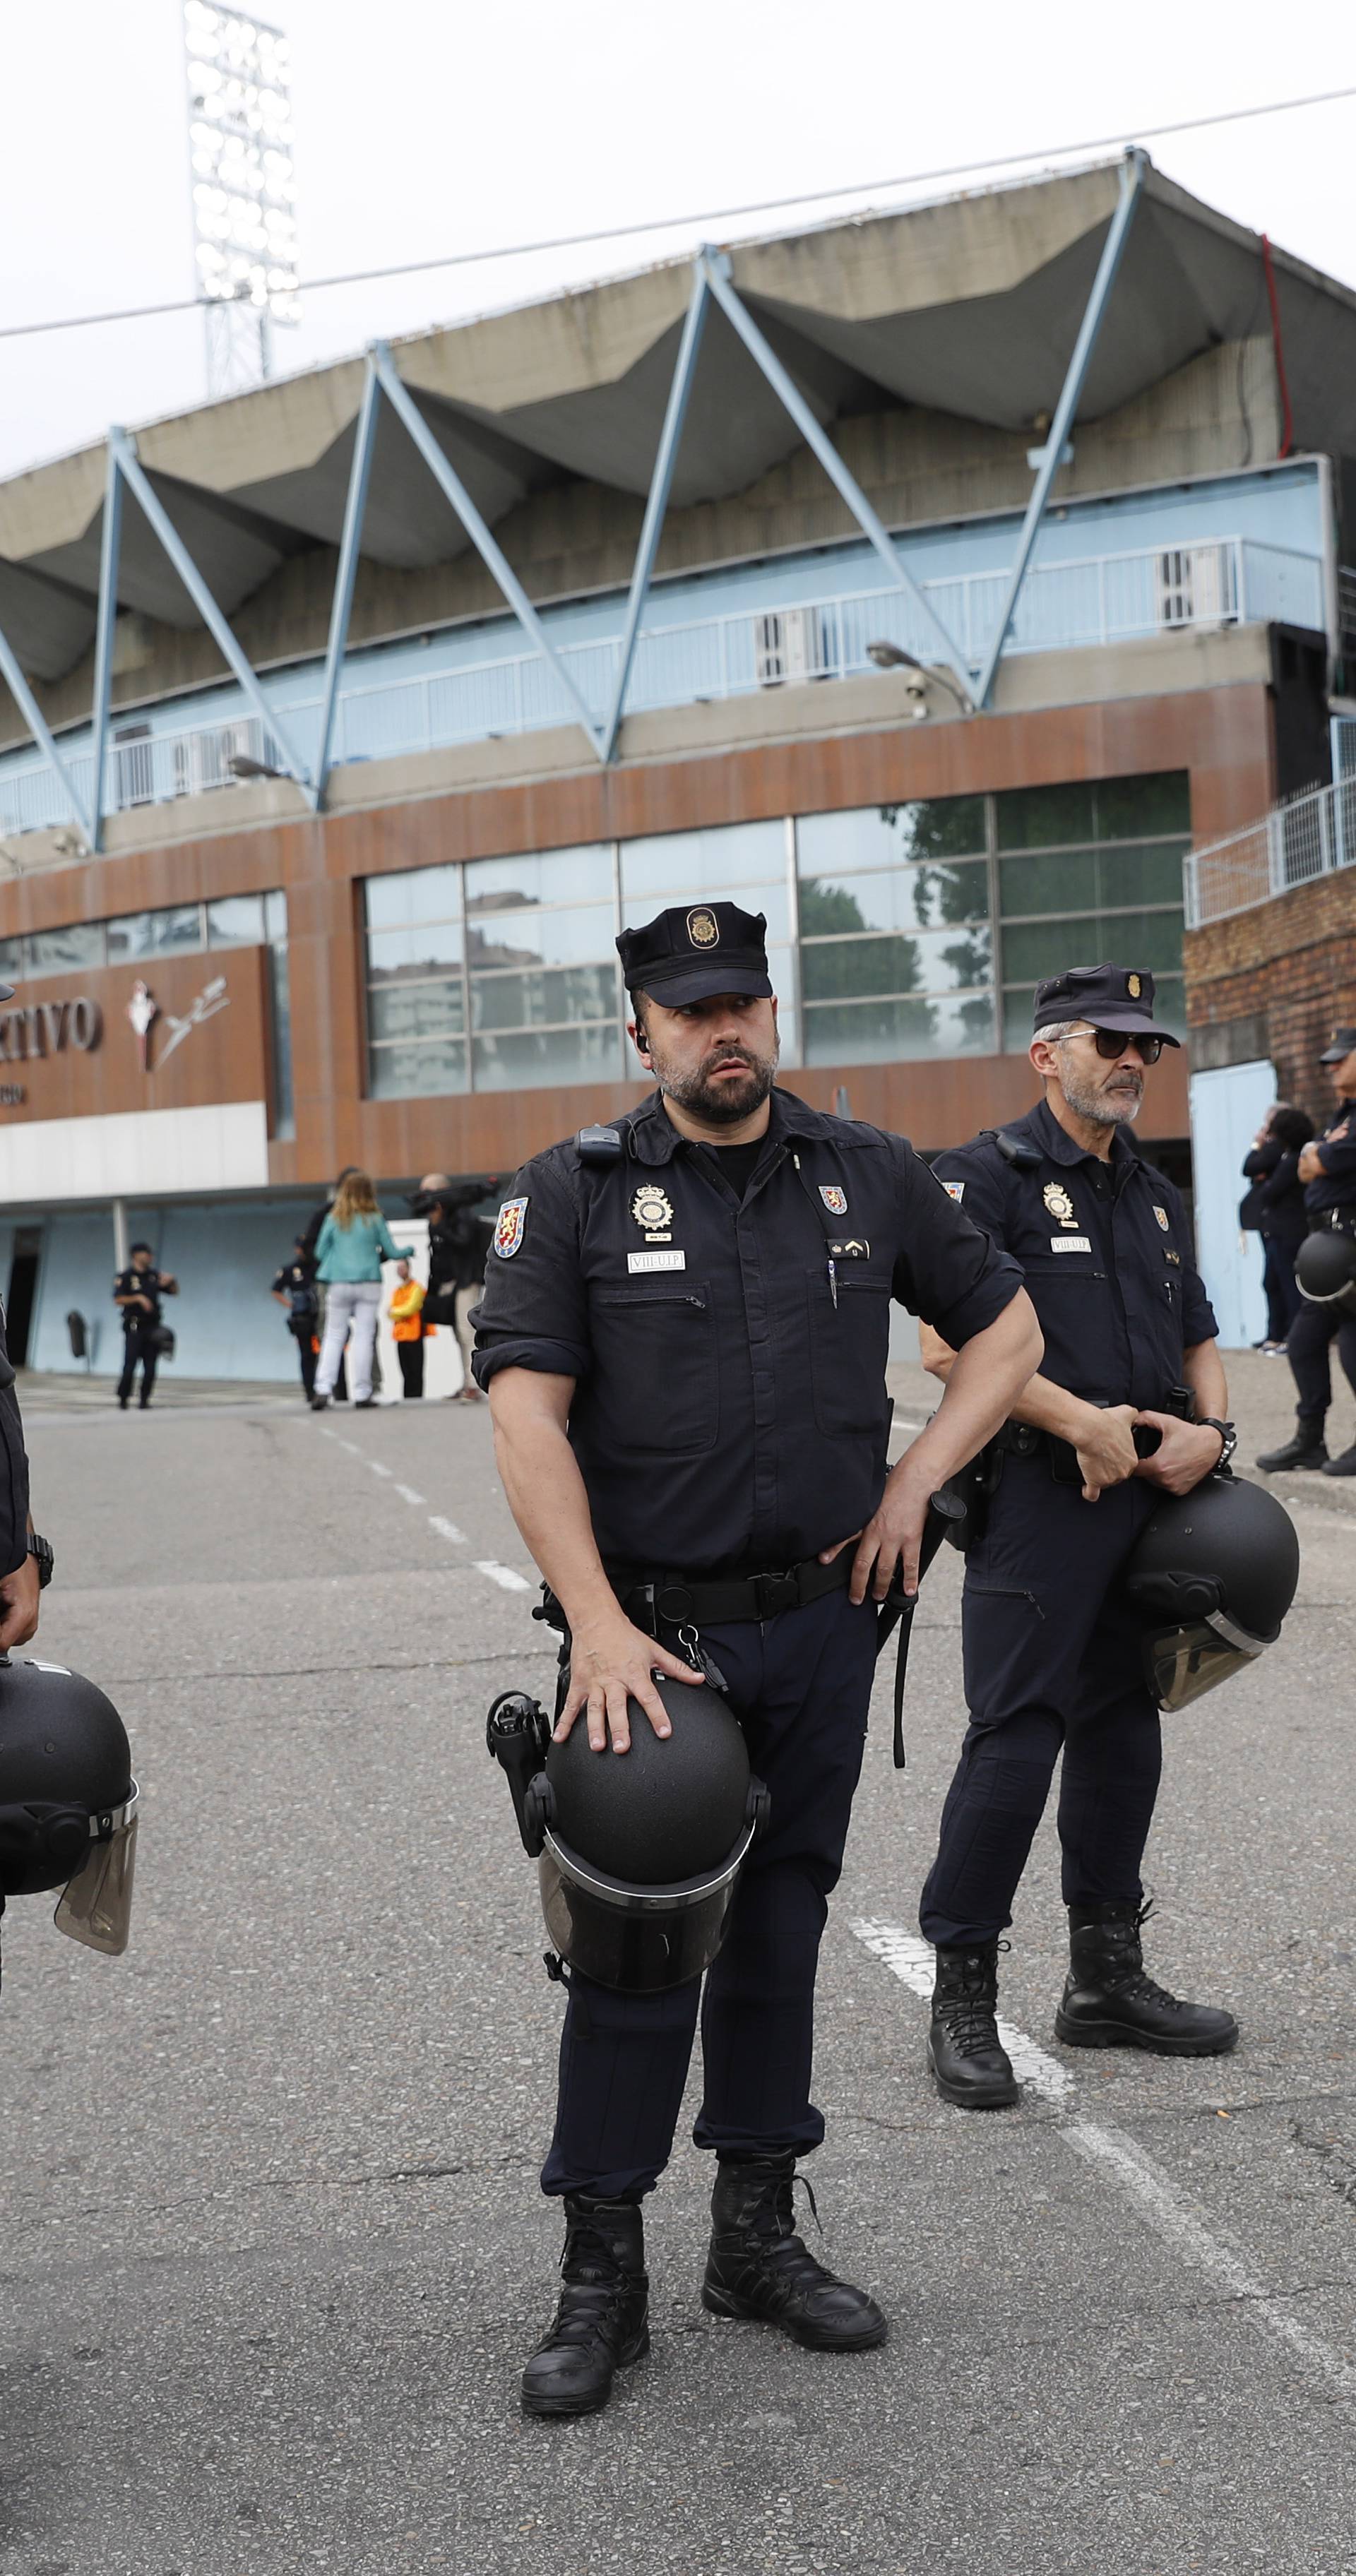 Security outside the stadium before the match